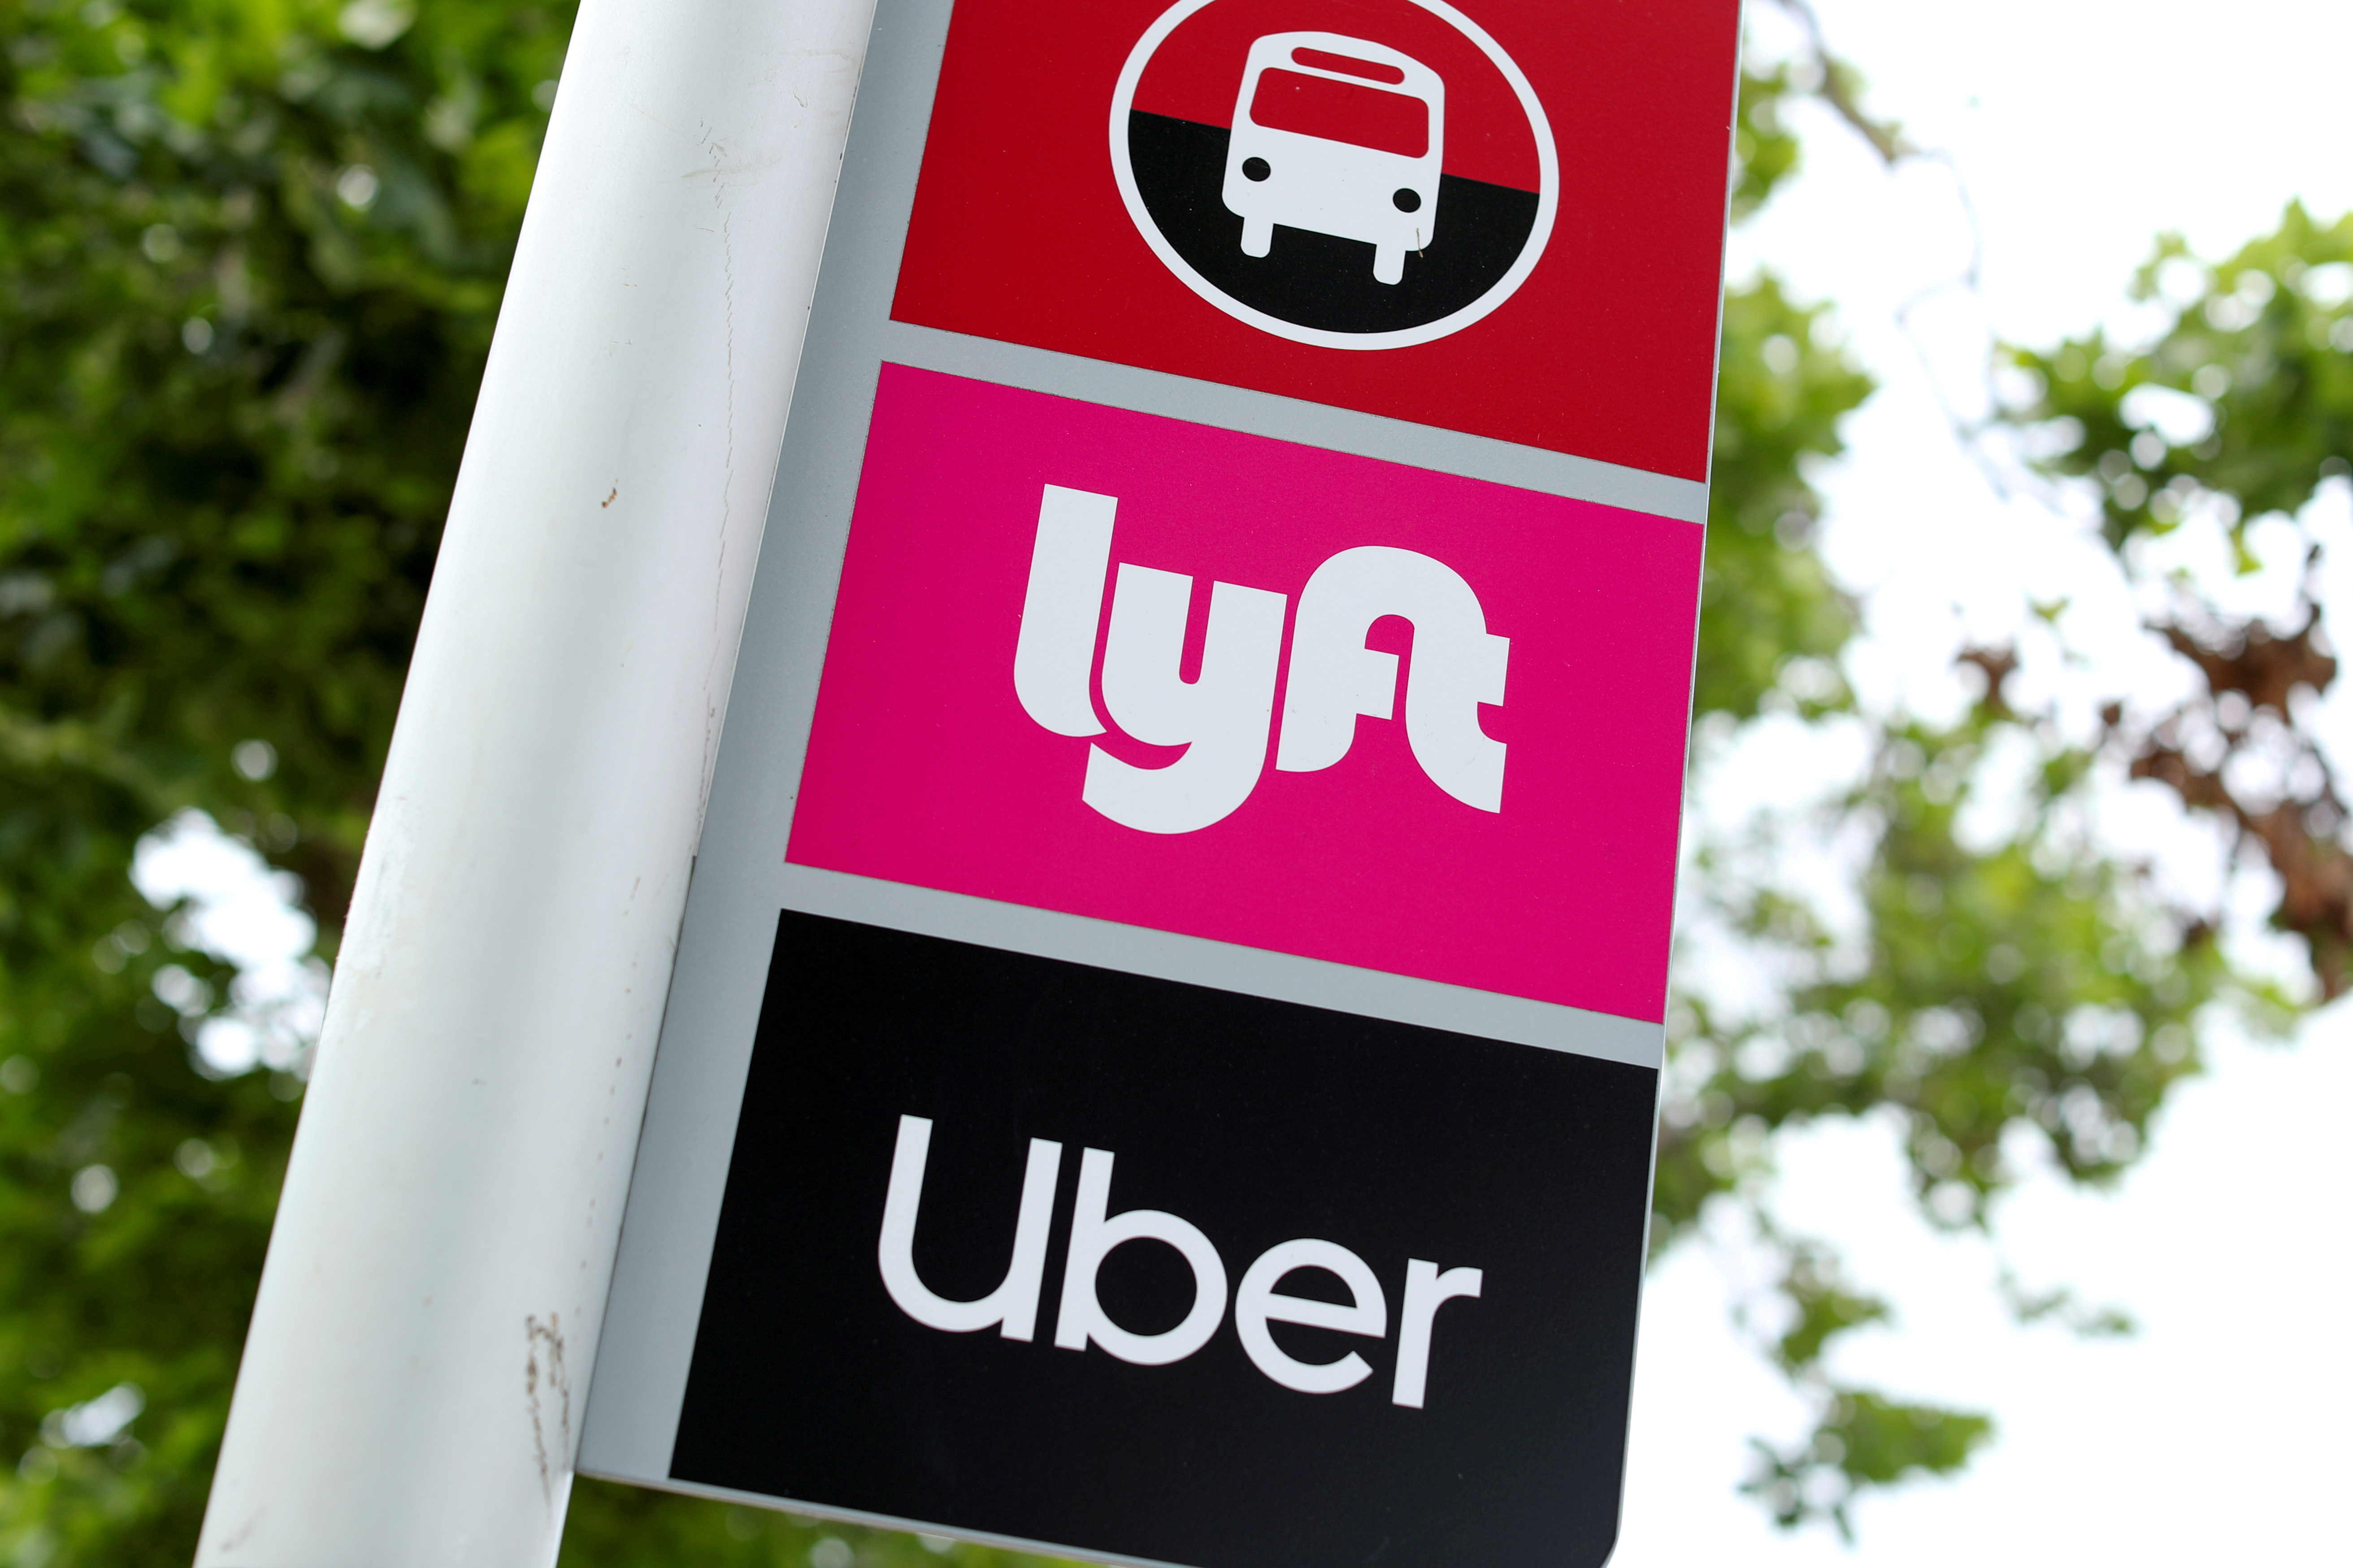 Uber, Lyft seen boosted by return of riders, but driver shortage, stubborn  virus cloud outlook | Reuters